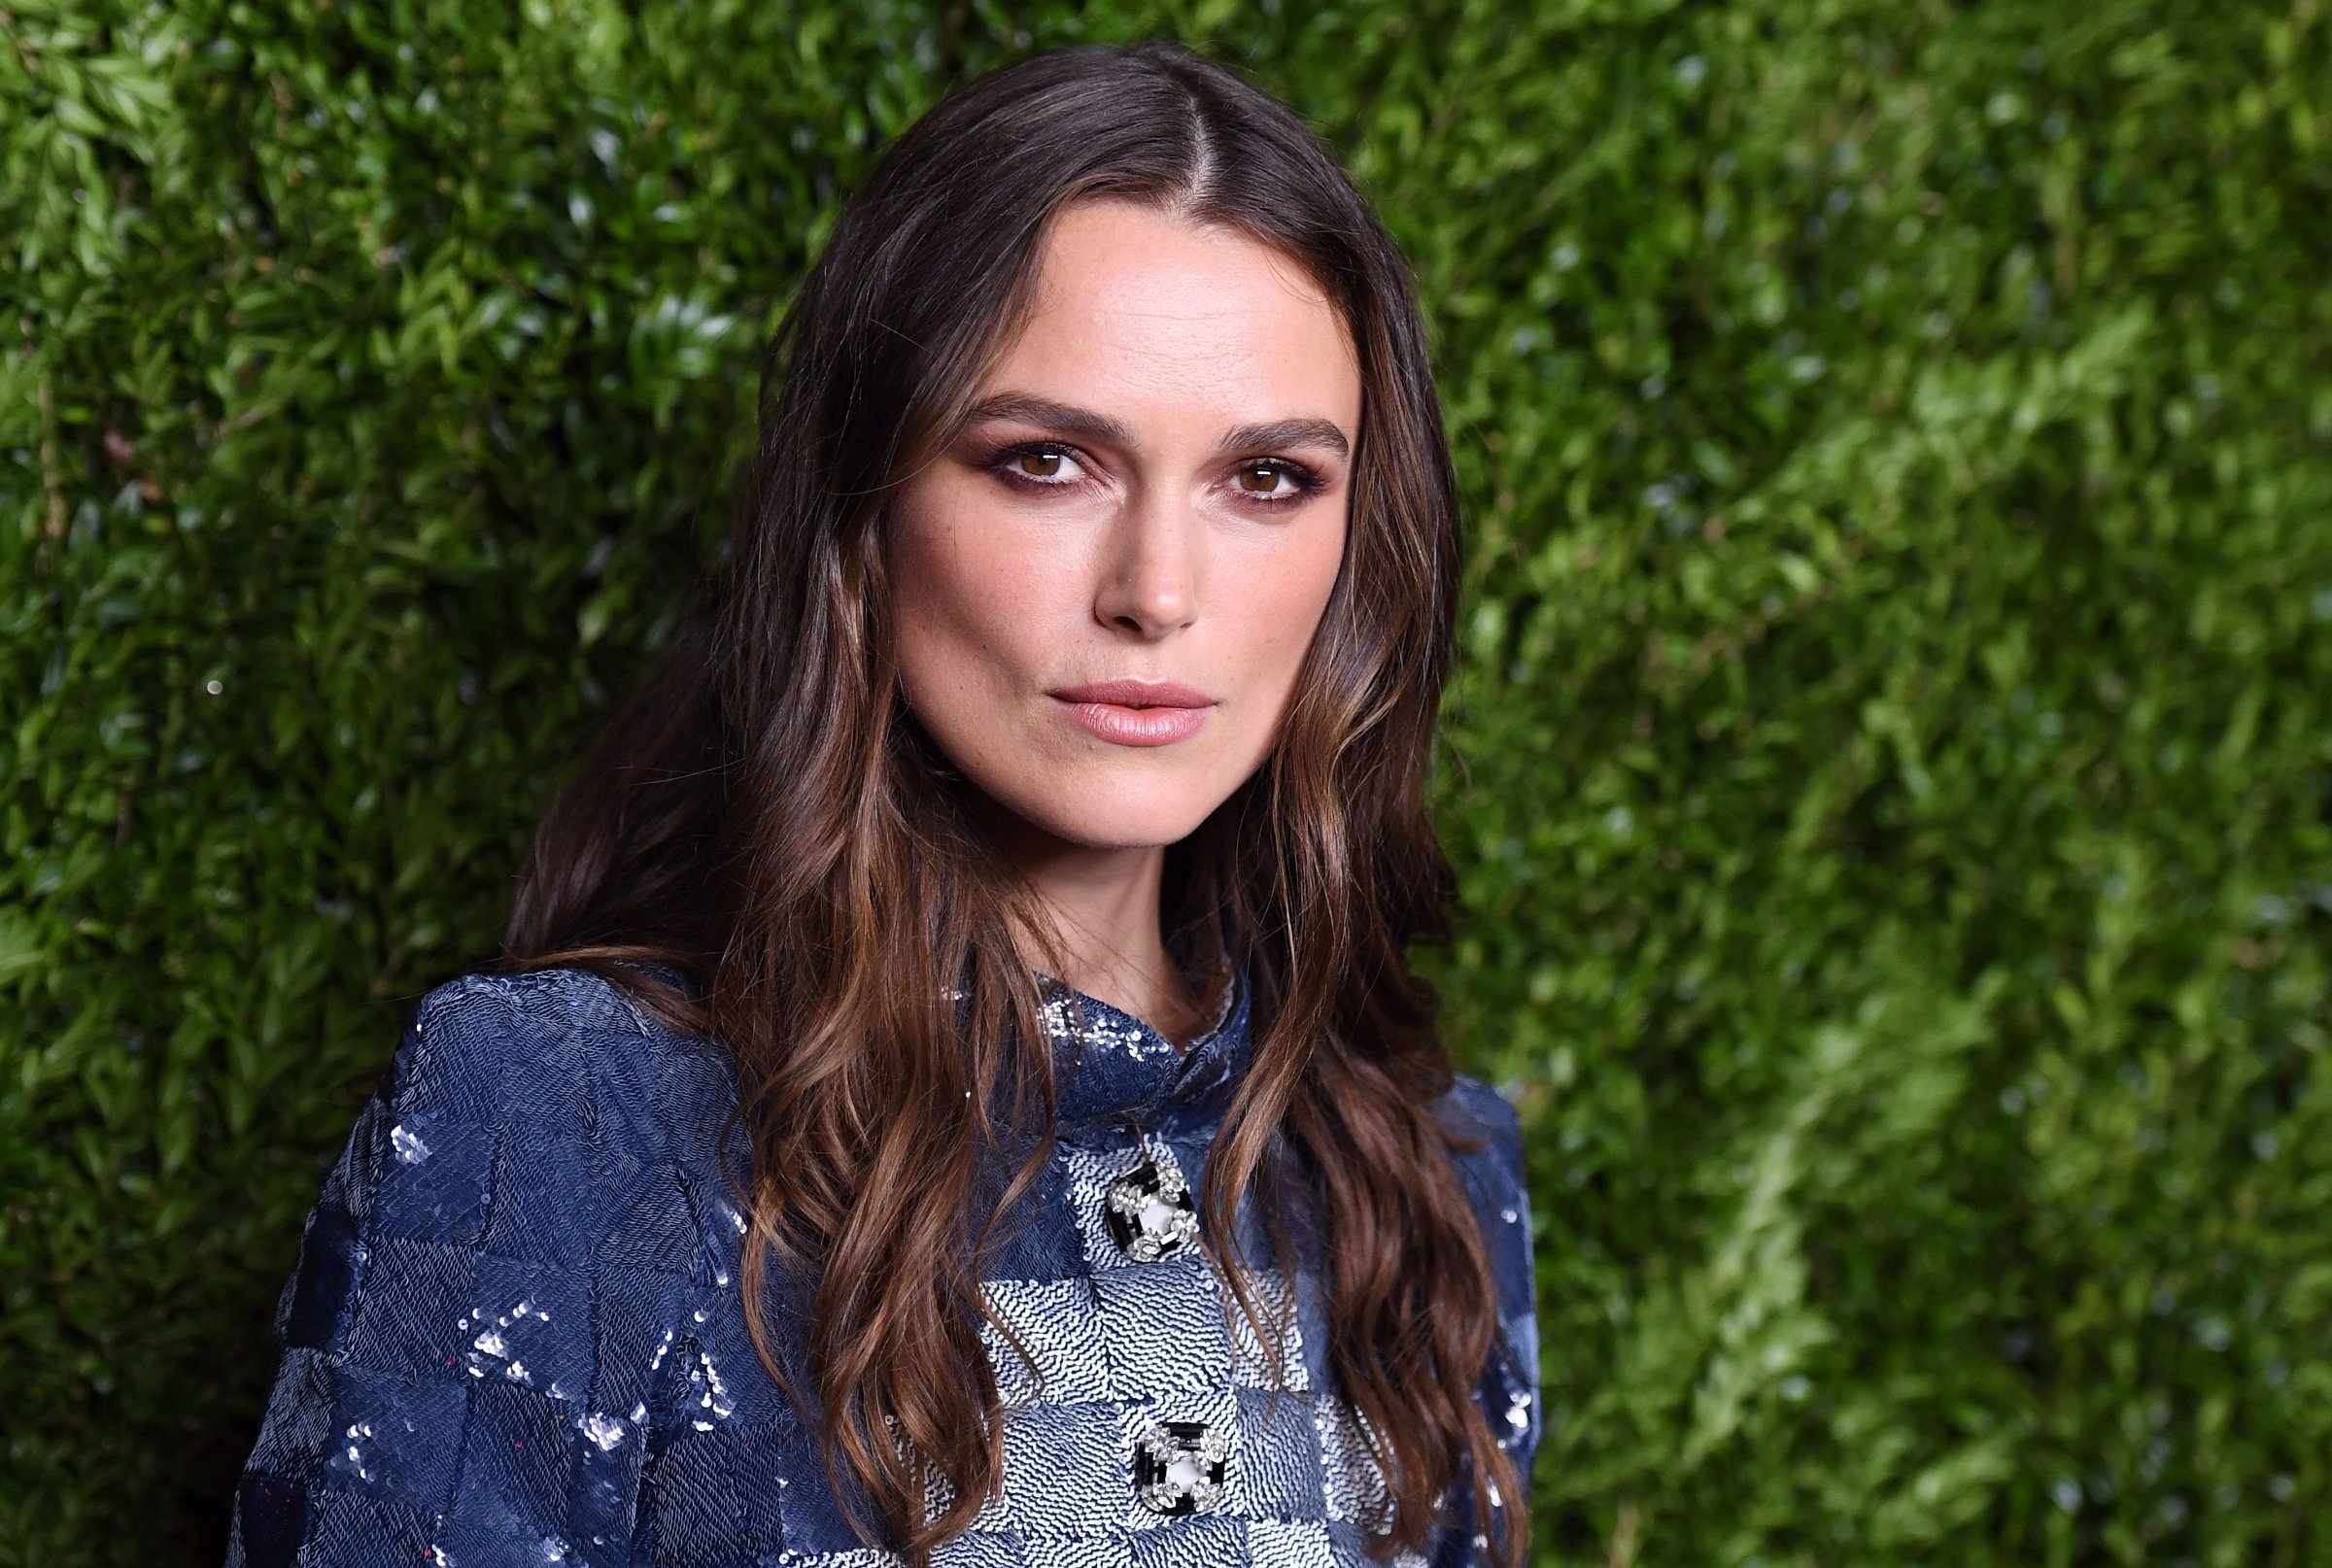 ENTERTAINMENT-US-CHANEL-JEWELRY-KEIRA KNIGHTLEY